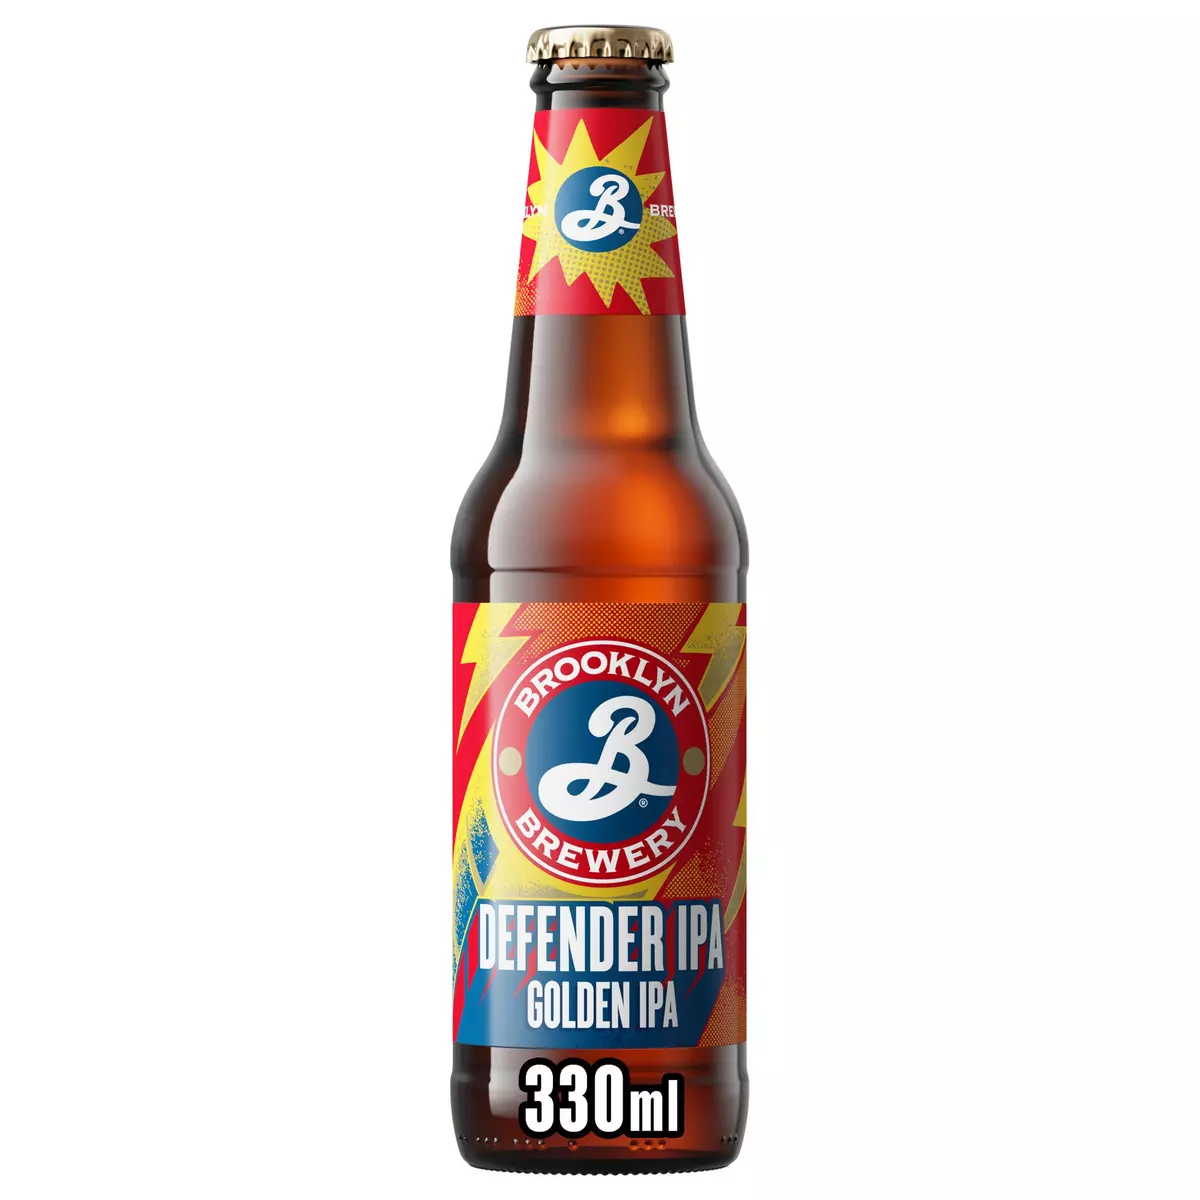 BROOKLYN Bière blonde Defender IPA 5.5% bouteille 33cl